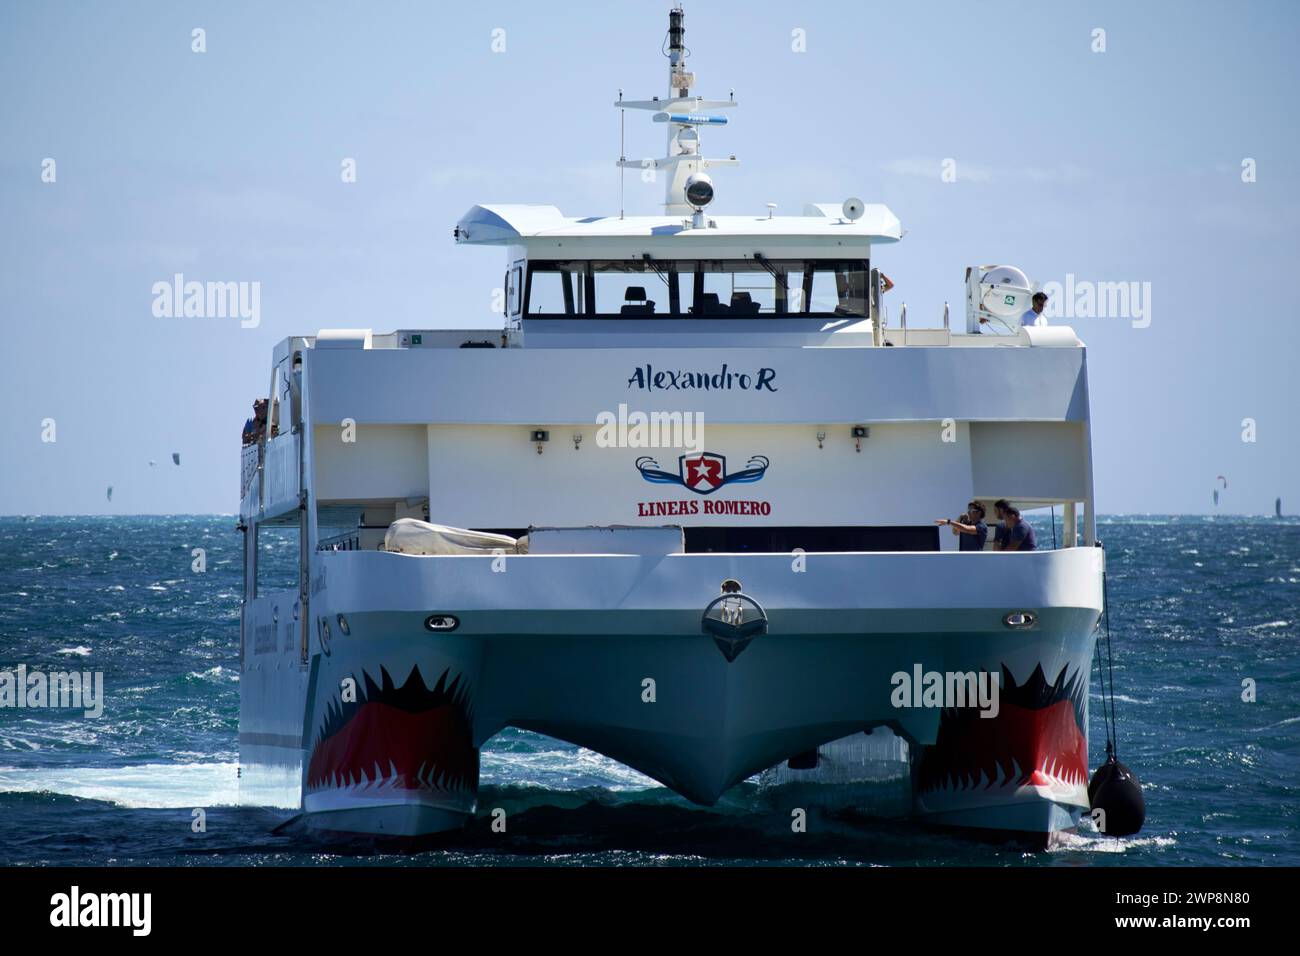 alexandro r lineas romero fast ferry between lanzarote and Fuerteventura pulling in to corralejo harbour, Canary Islands, spain Stock Photo